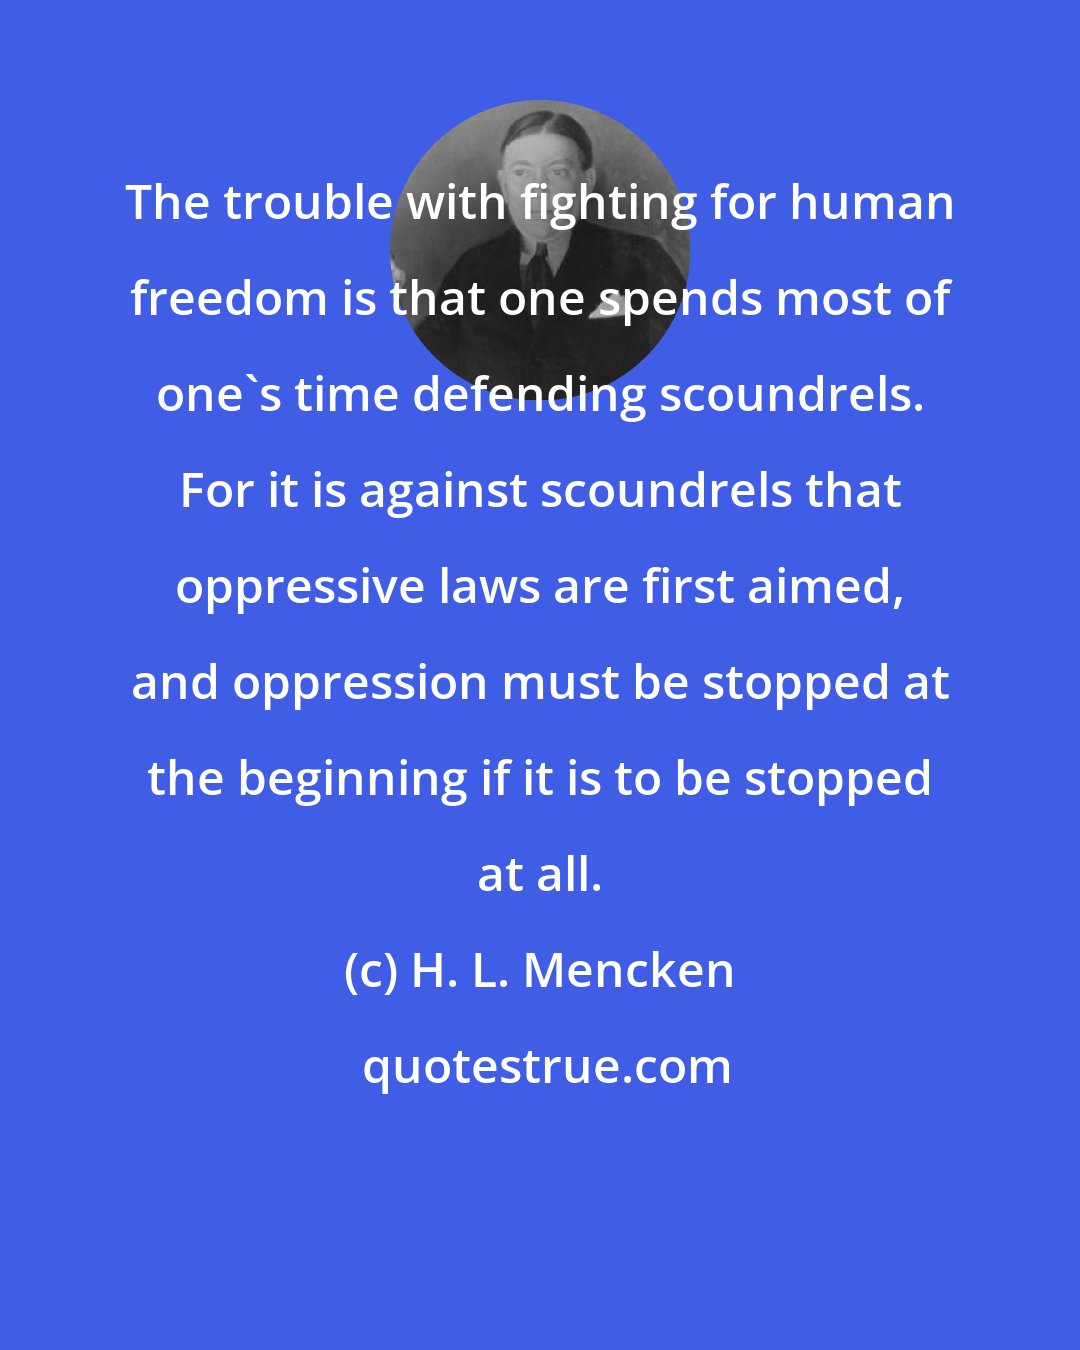 H. L. Mencken: The trouble with fighting for human freedom is that one spends most of one's time defending scoundrels. For it is against scoundrels that oppressive laws are first aimed, and oppression must be stopped at the beginning if it is to be stopped at all.